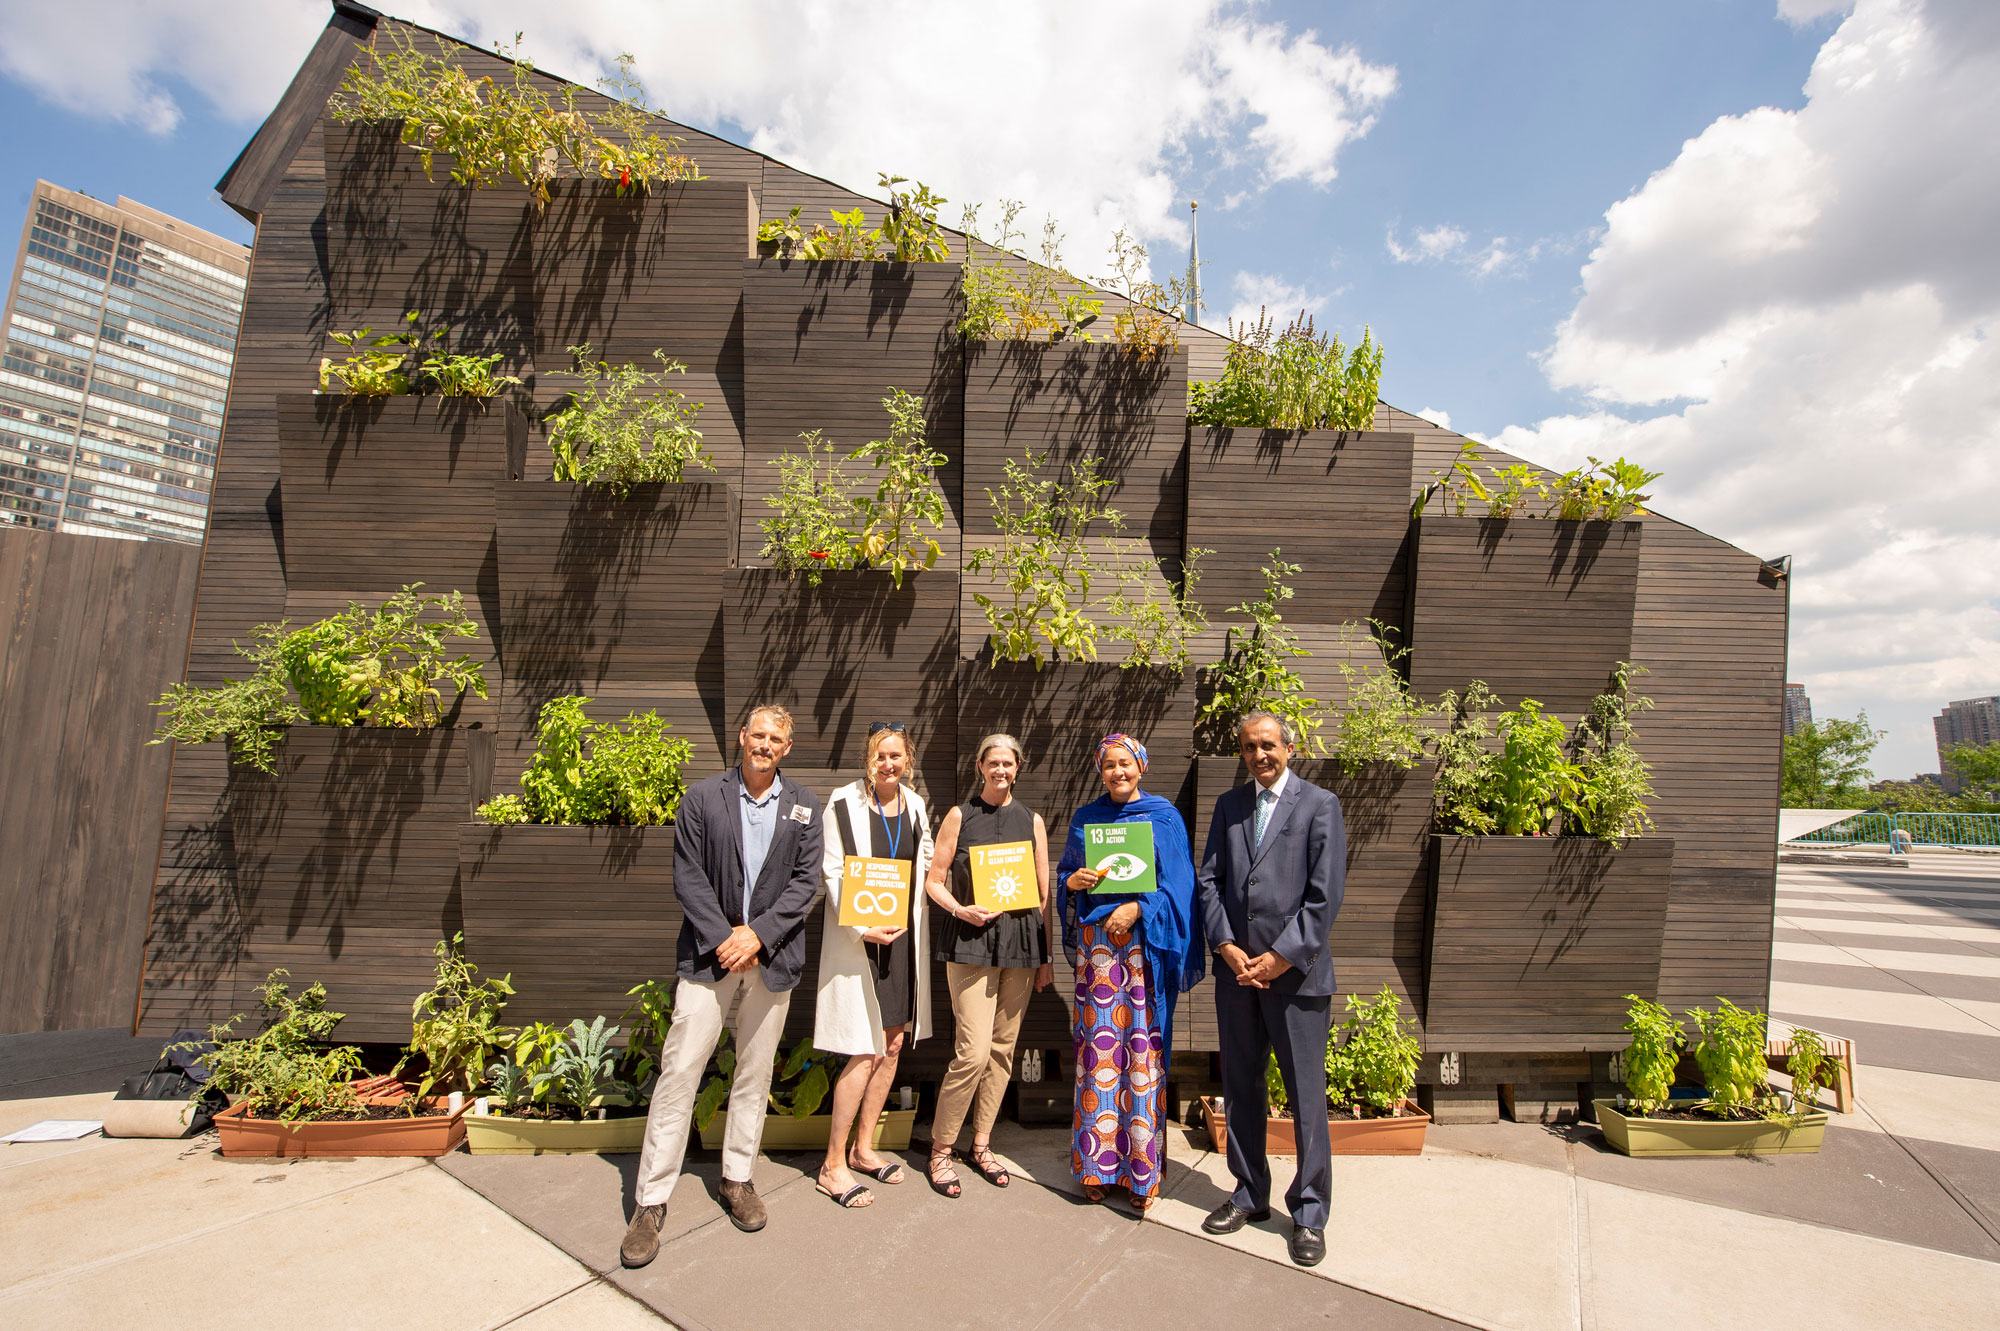 Deputy Secretary-General Amina Mohammed (2nd right) visits an Ecological Living Module, a demonstration of eco-friendly and affordable housing exhibited at UN Headquarters in New York. (file)